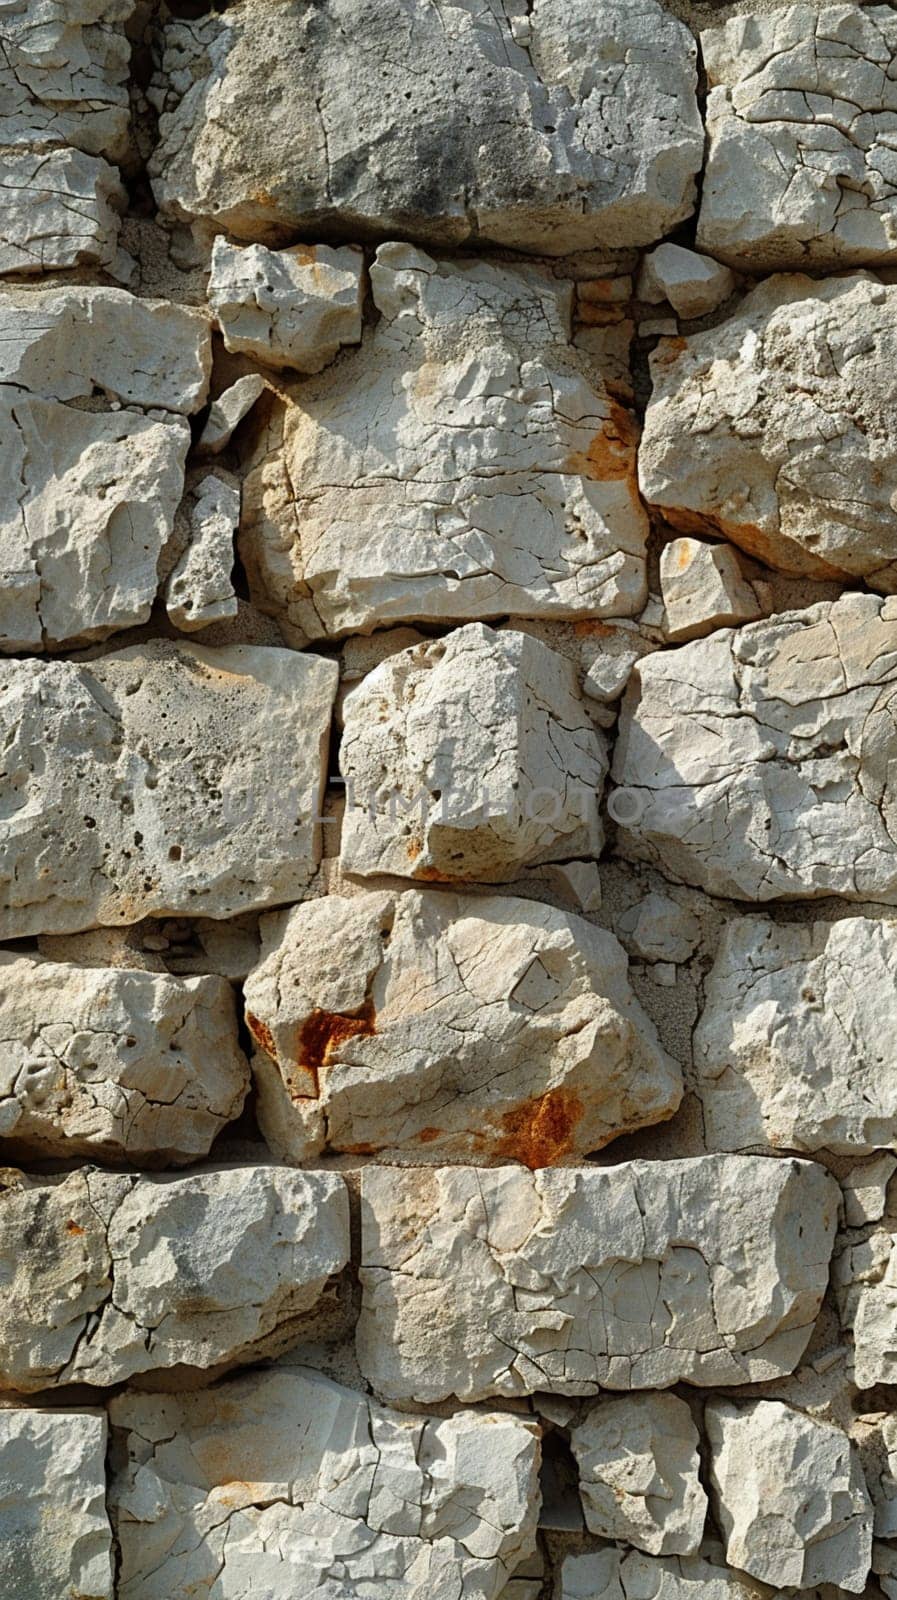 Rough texture of a limestone cliff, suitable for rugged and natural backgrounds.